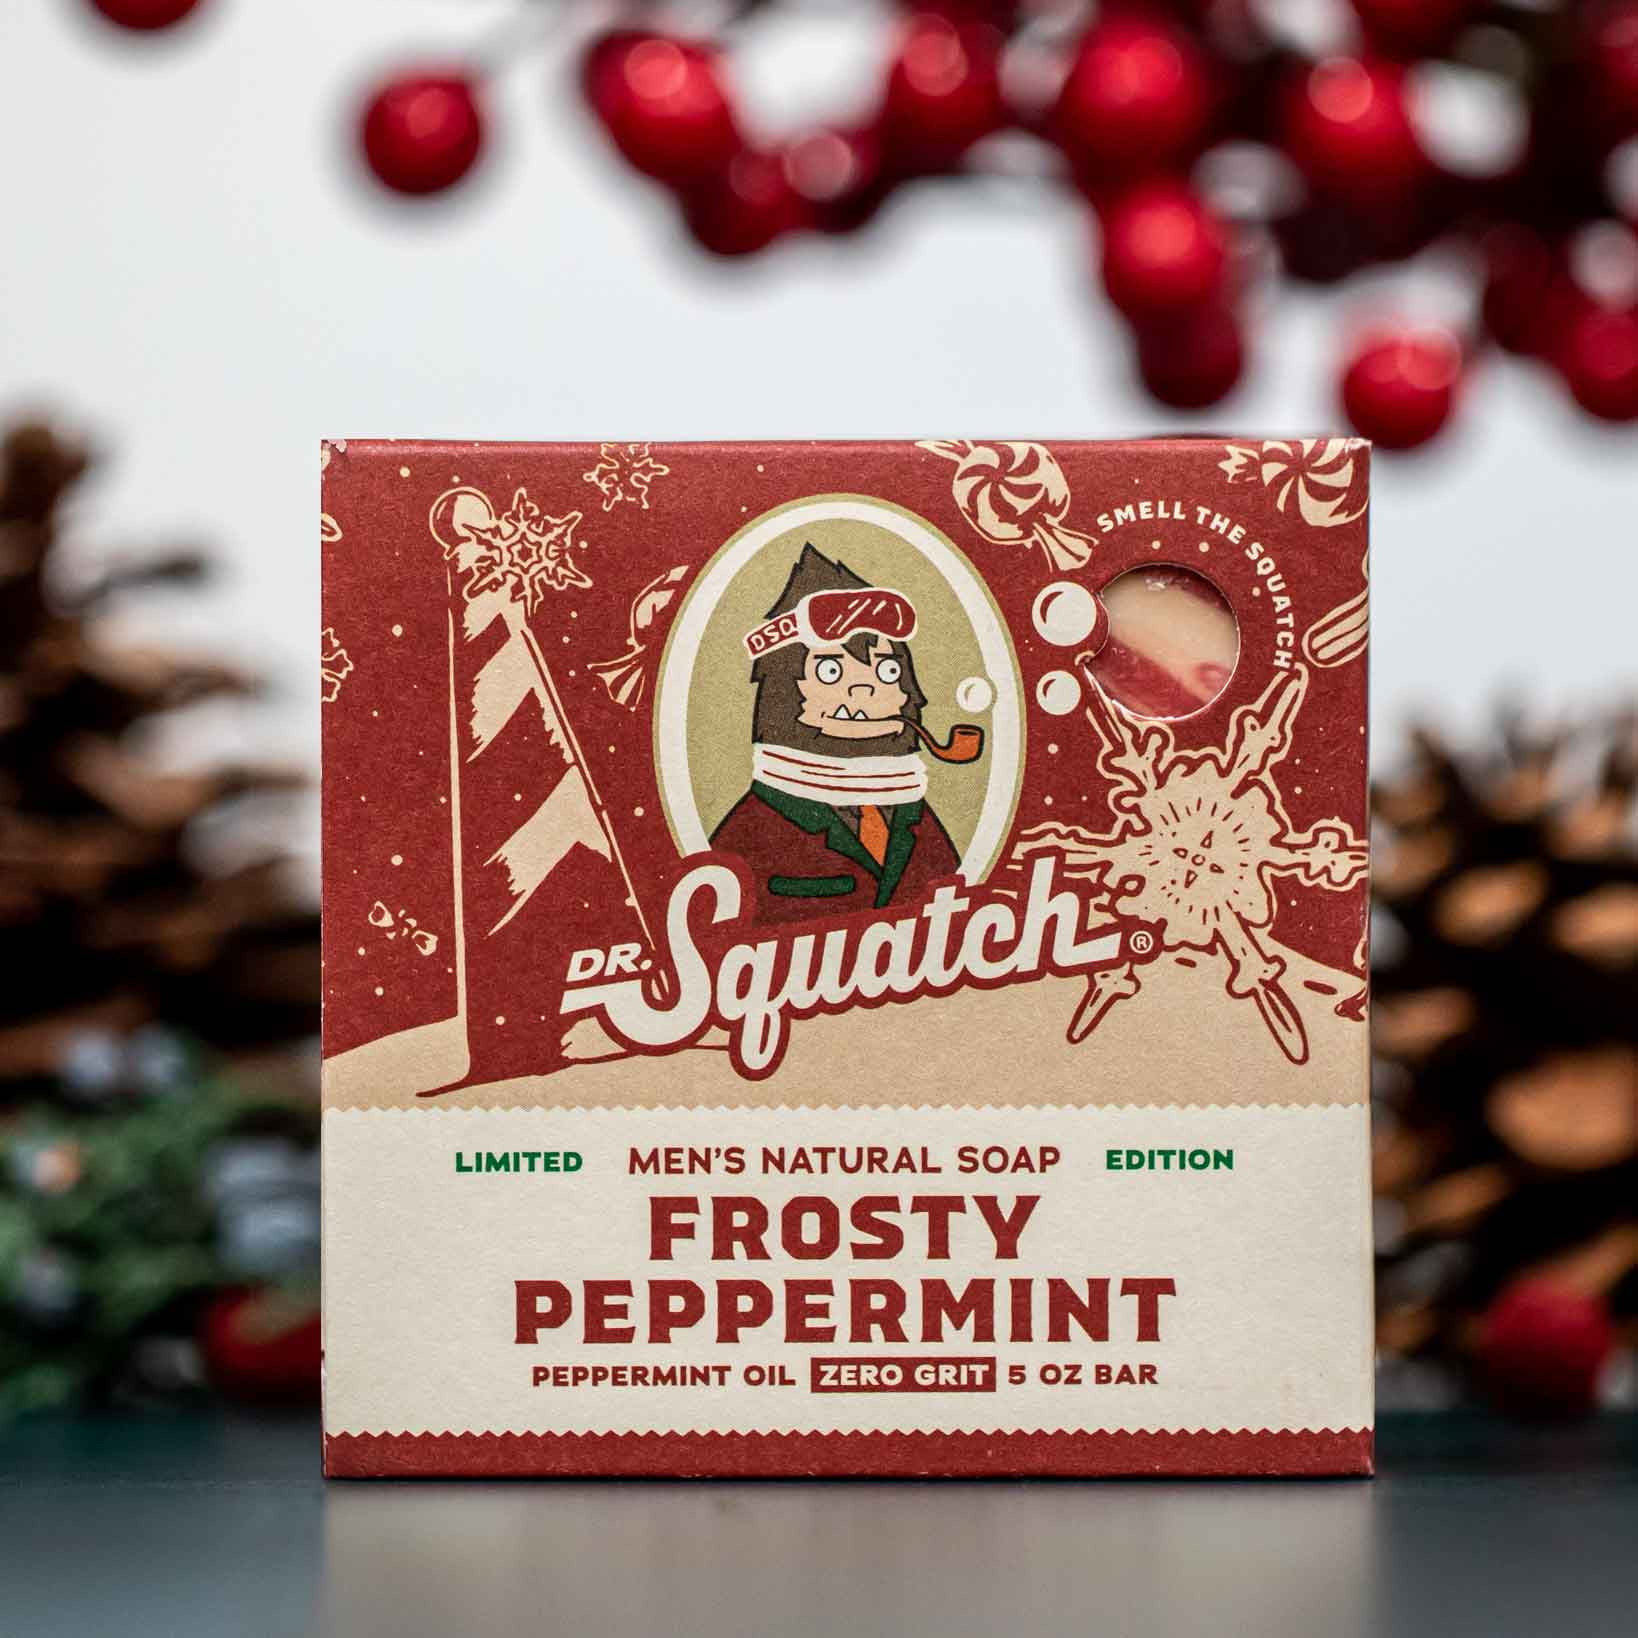 Dr Squatch Limited Edition Frosty Peppermint Shampoo, Conditioner